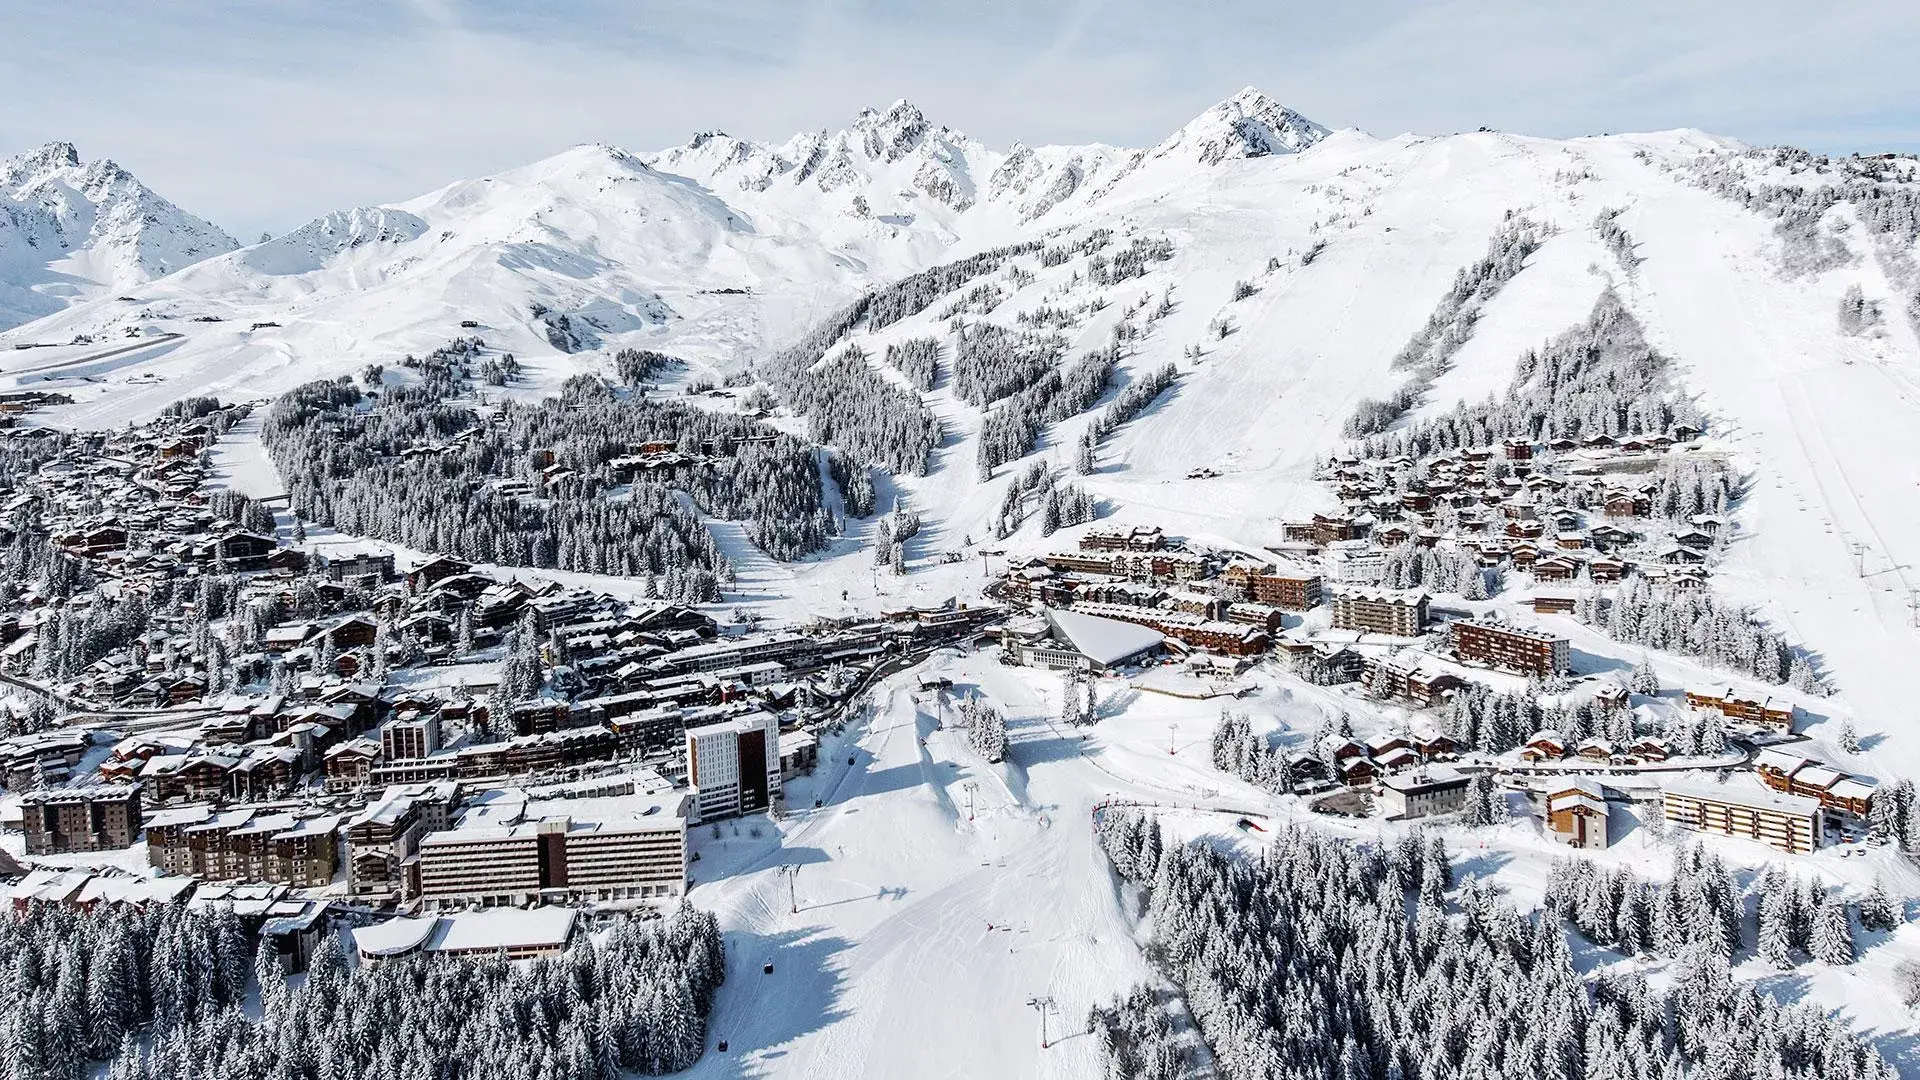 The World's Most Exciting Ski Destinations